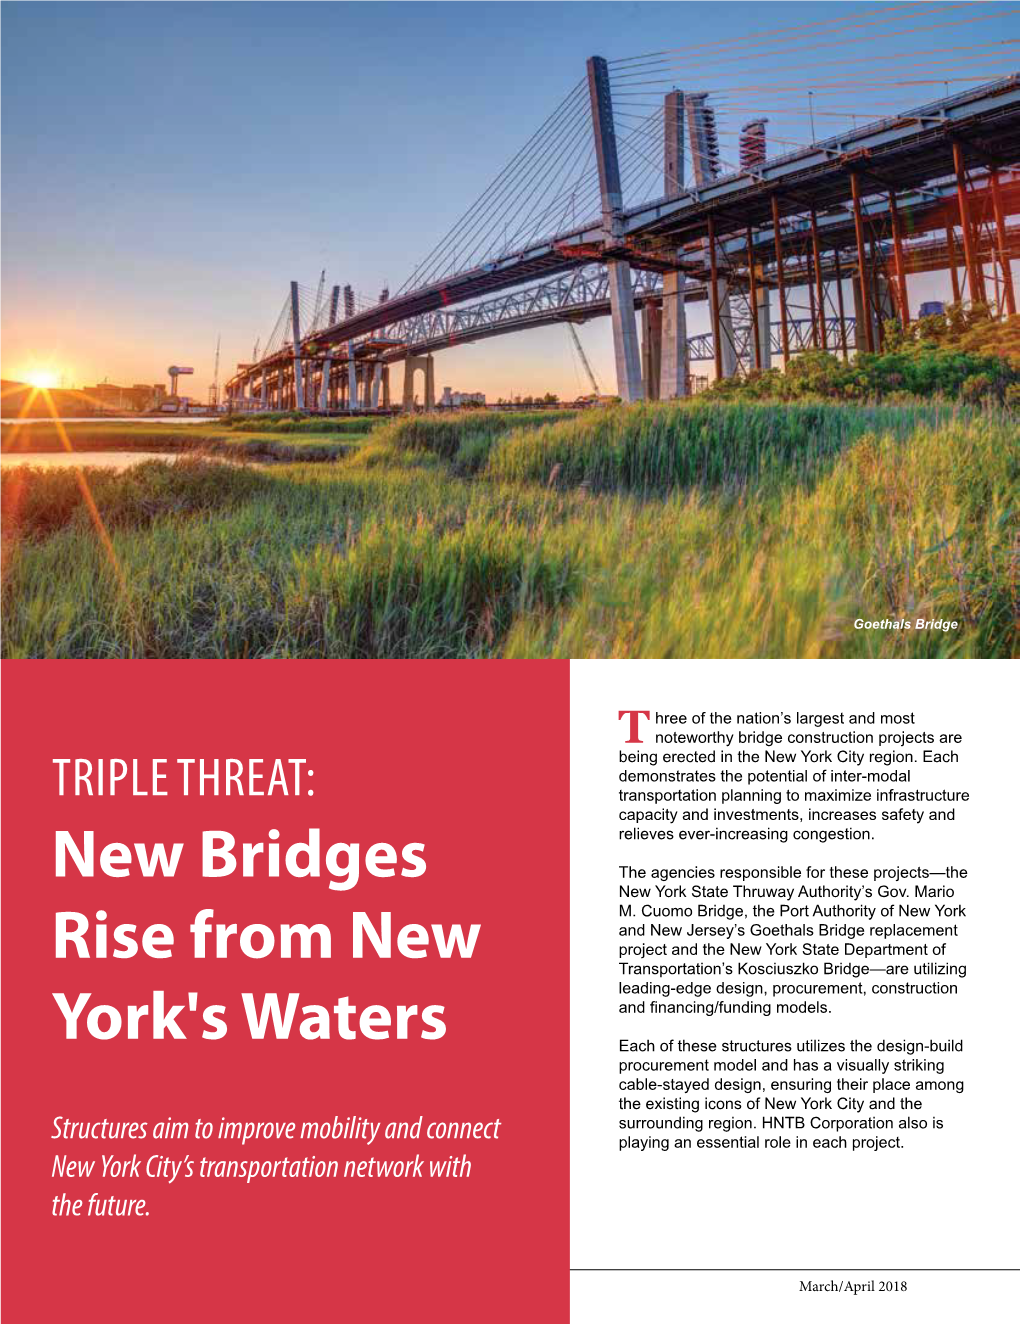 New Bridges Rise from New York's Waters